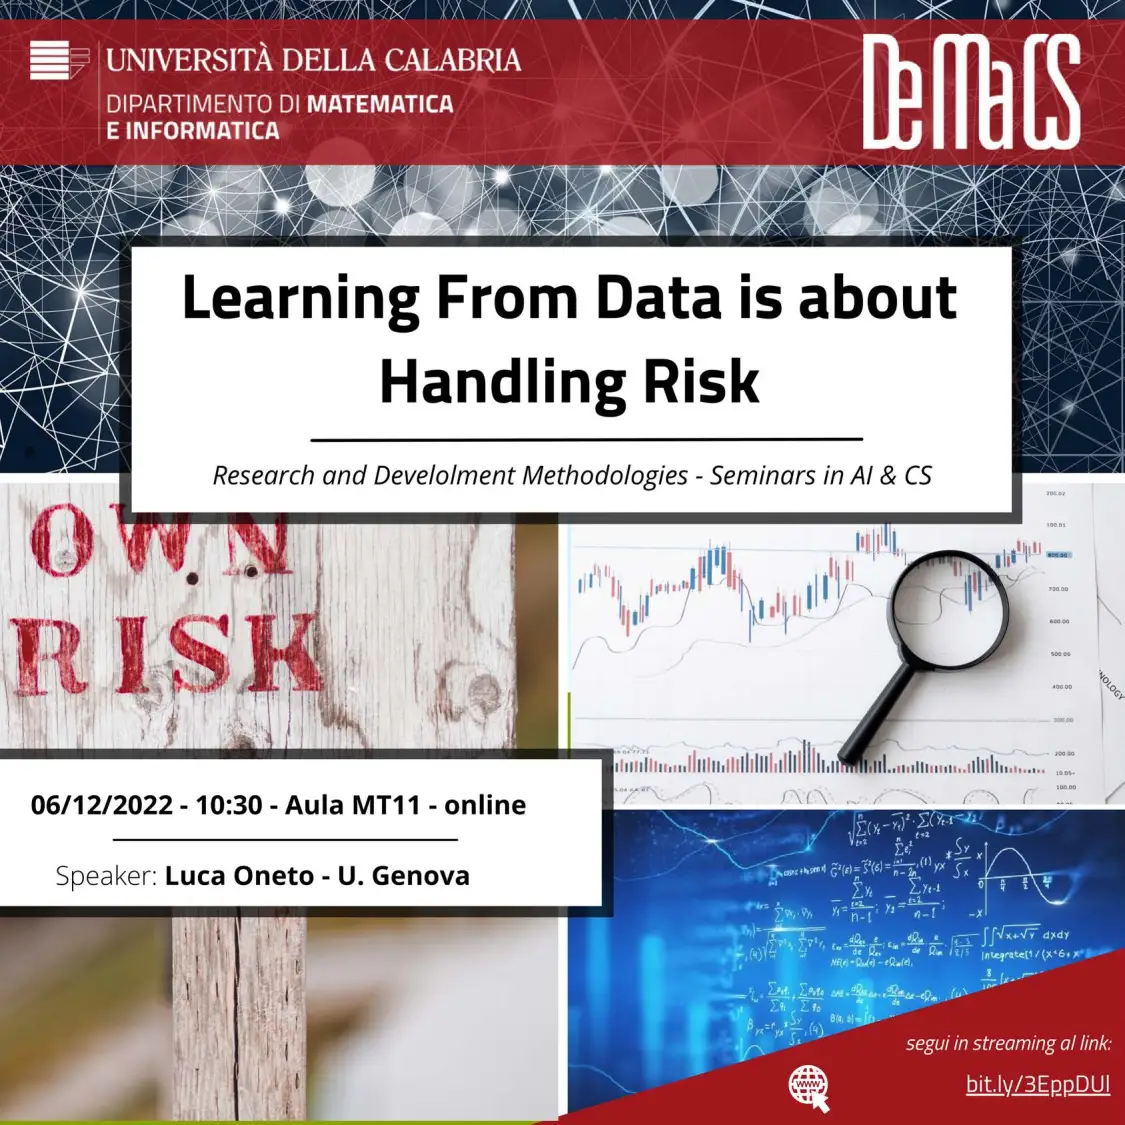 Learning From Data is about Handling Risk, Luca Oneto, 06/12/2022